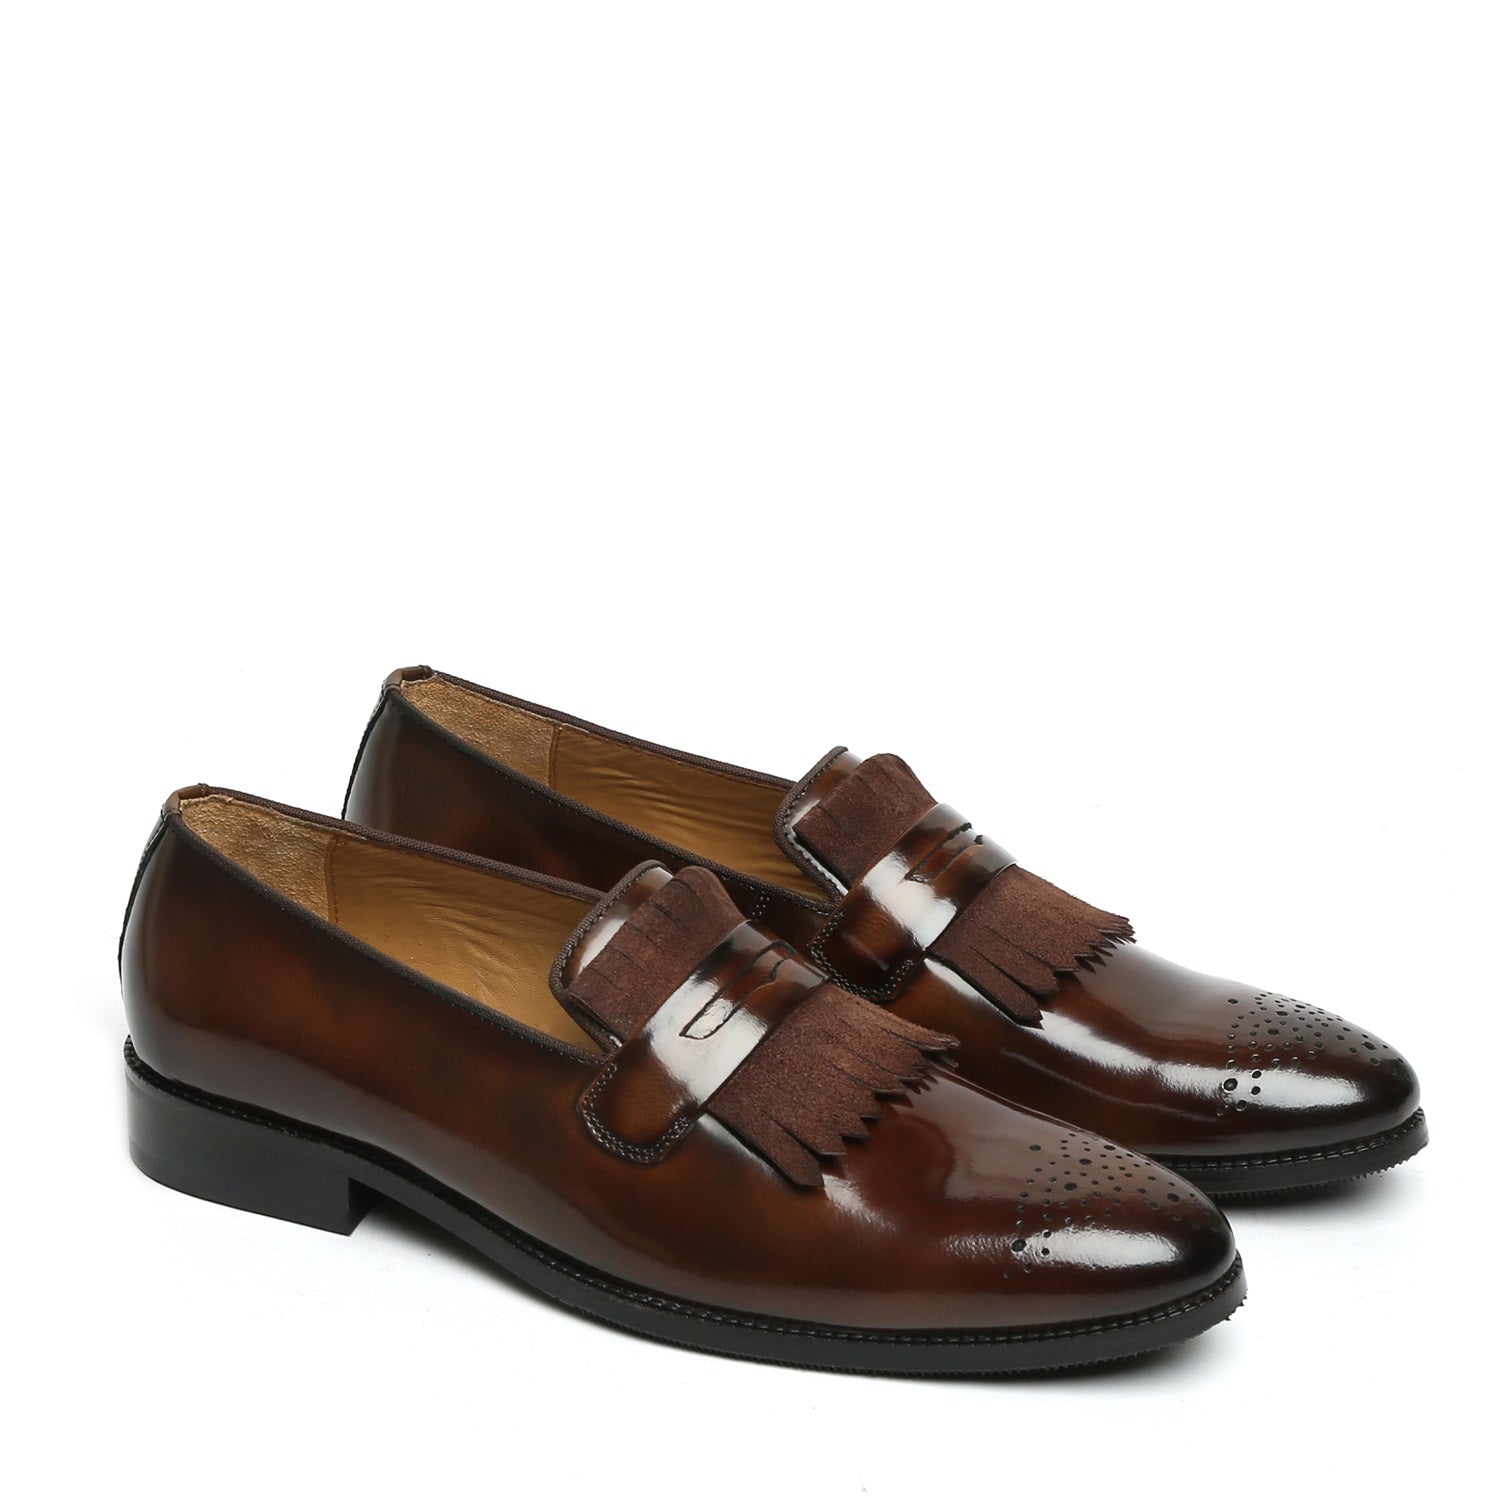 Patent Leather Slip-On Shoe With Dark Brown Suede Fringes